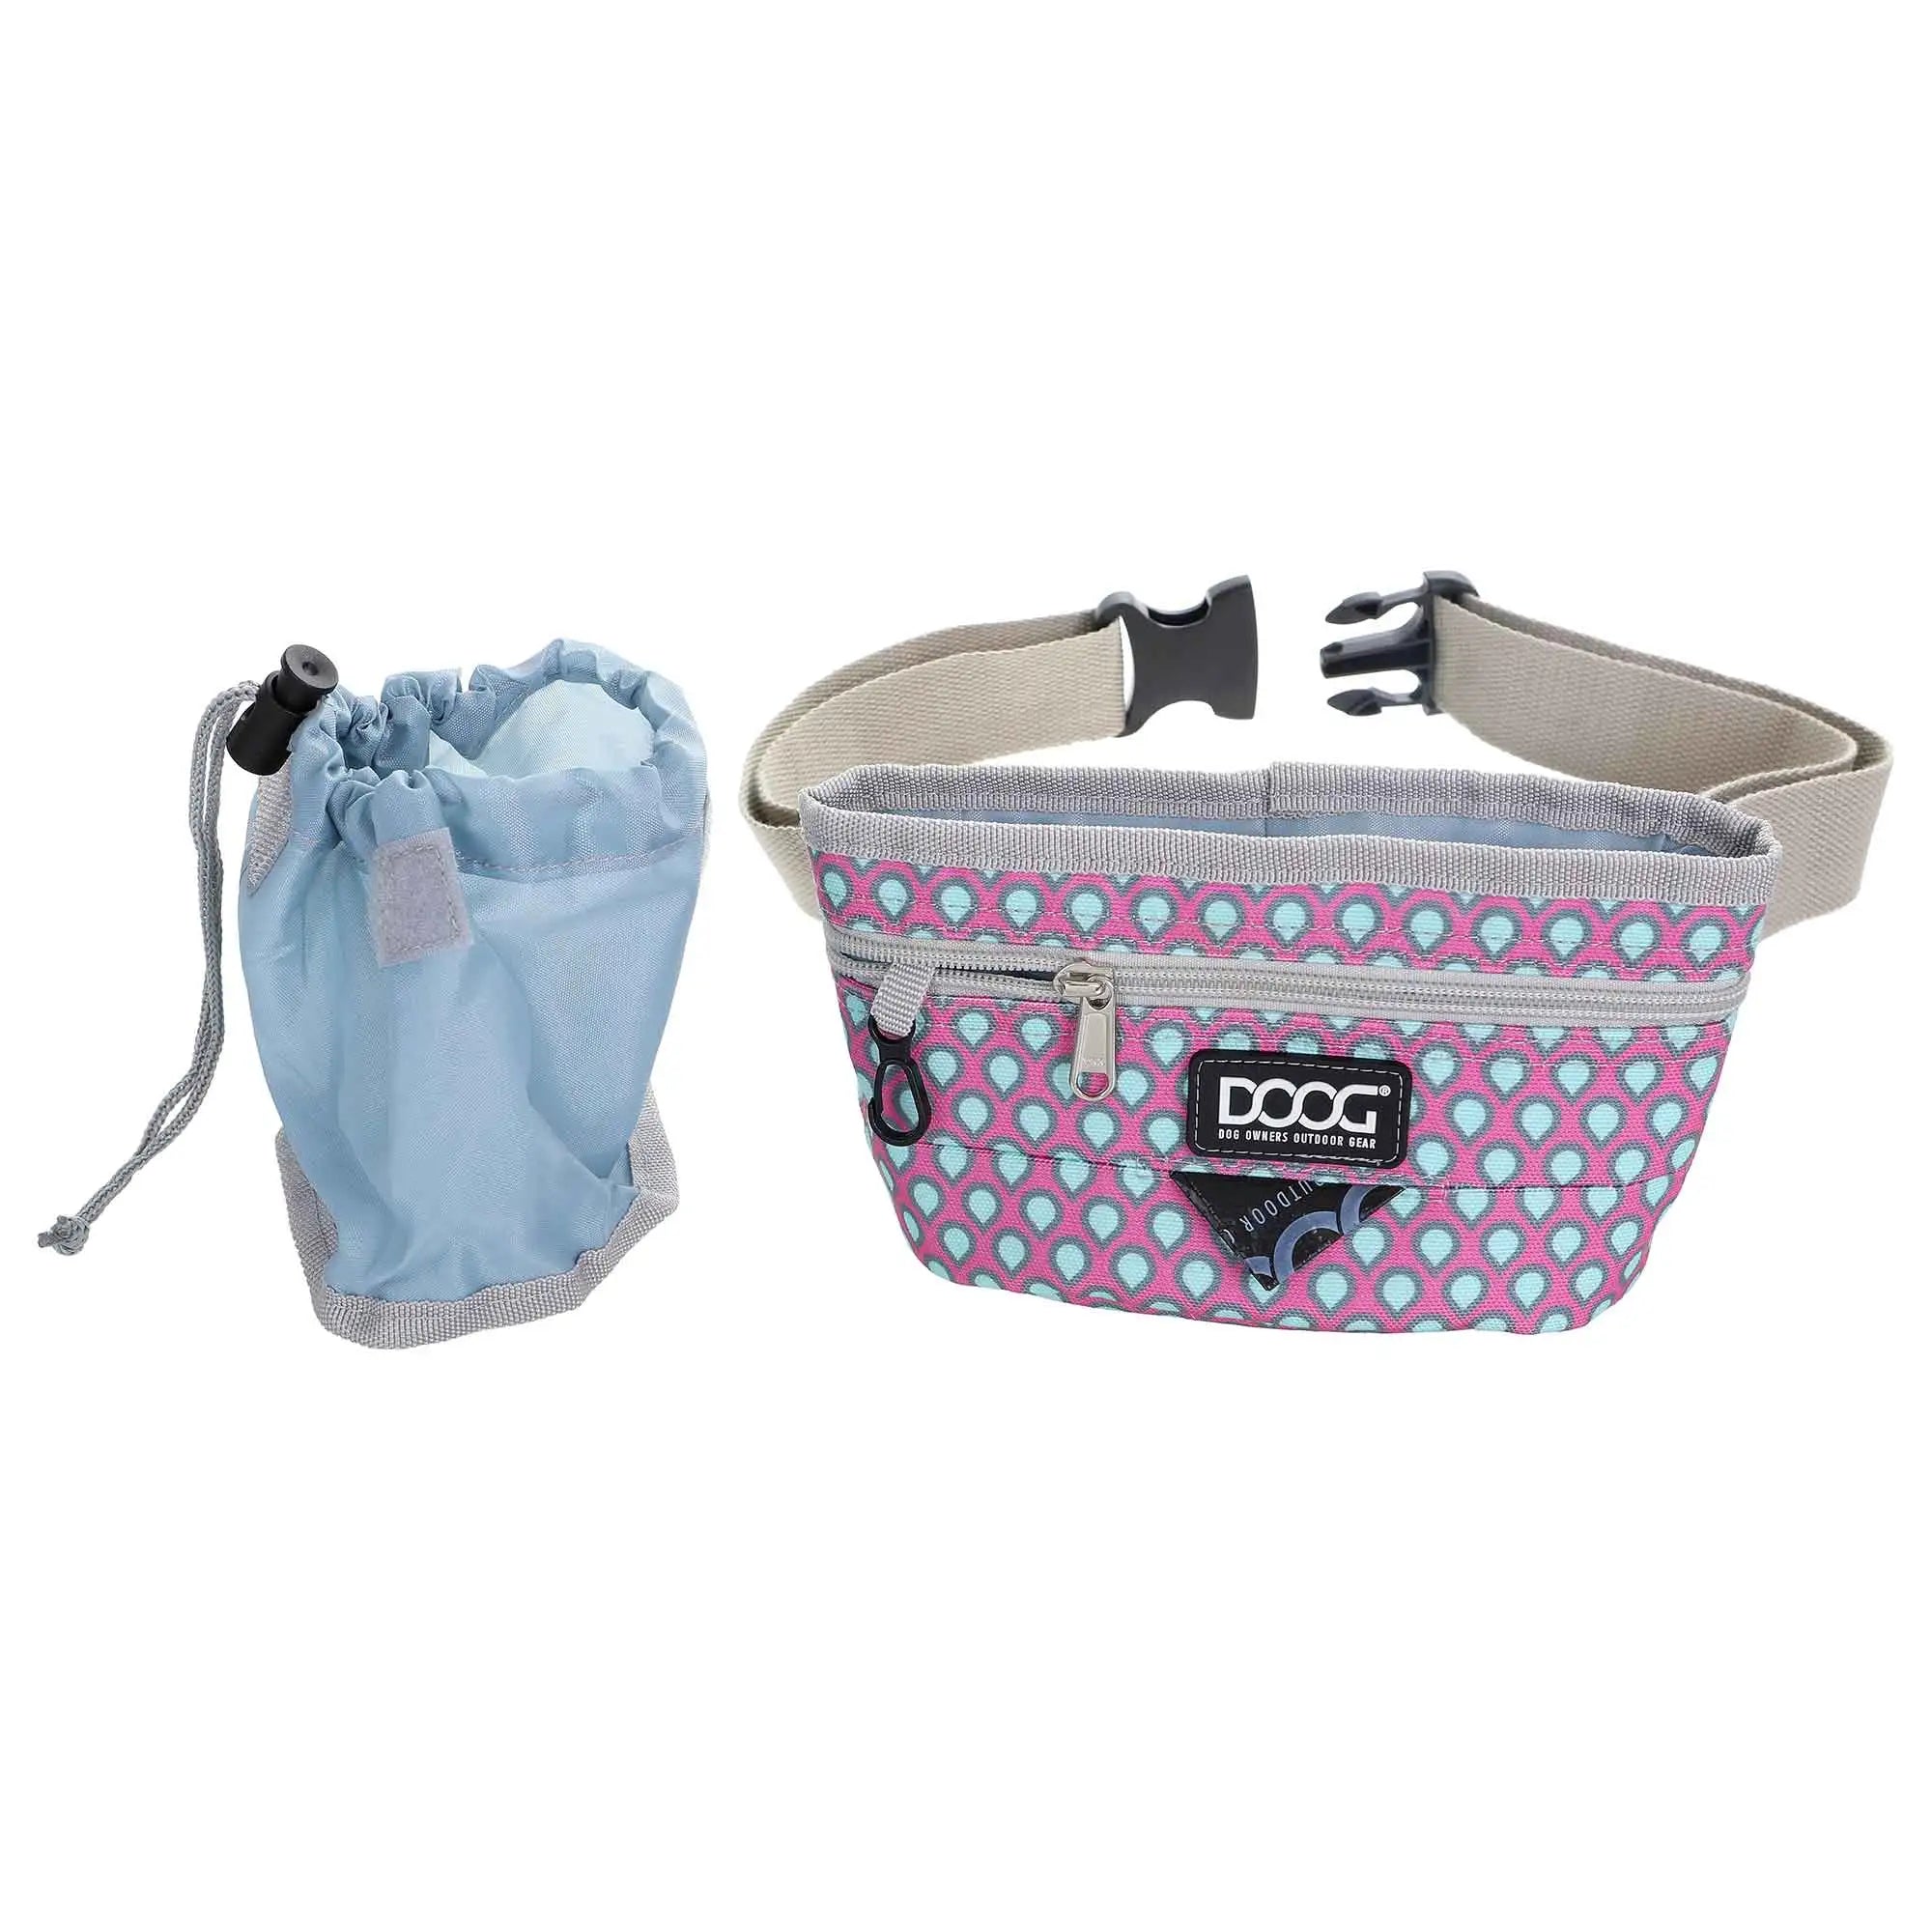 DOOG Treat and Training Pouch Large Pink/Tear Drops 8" x 8" x 5"